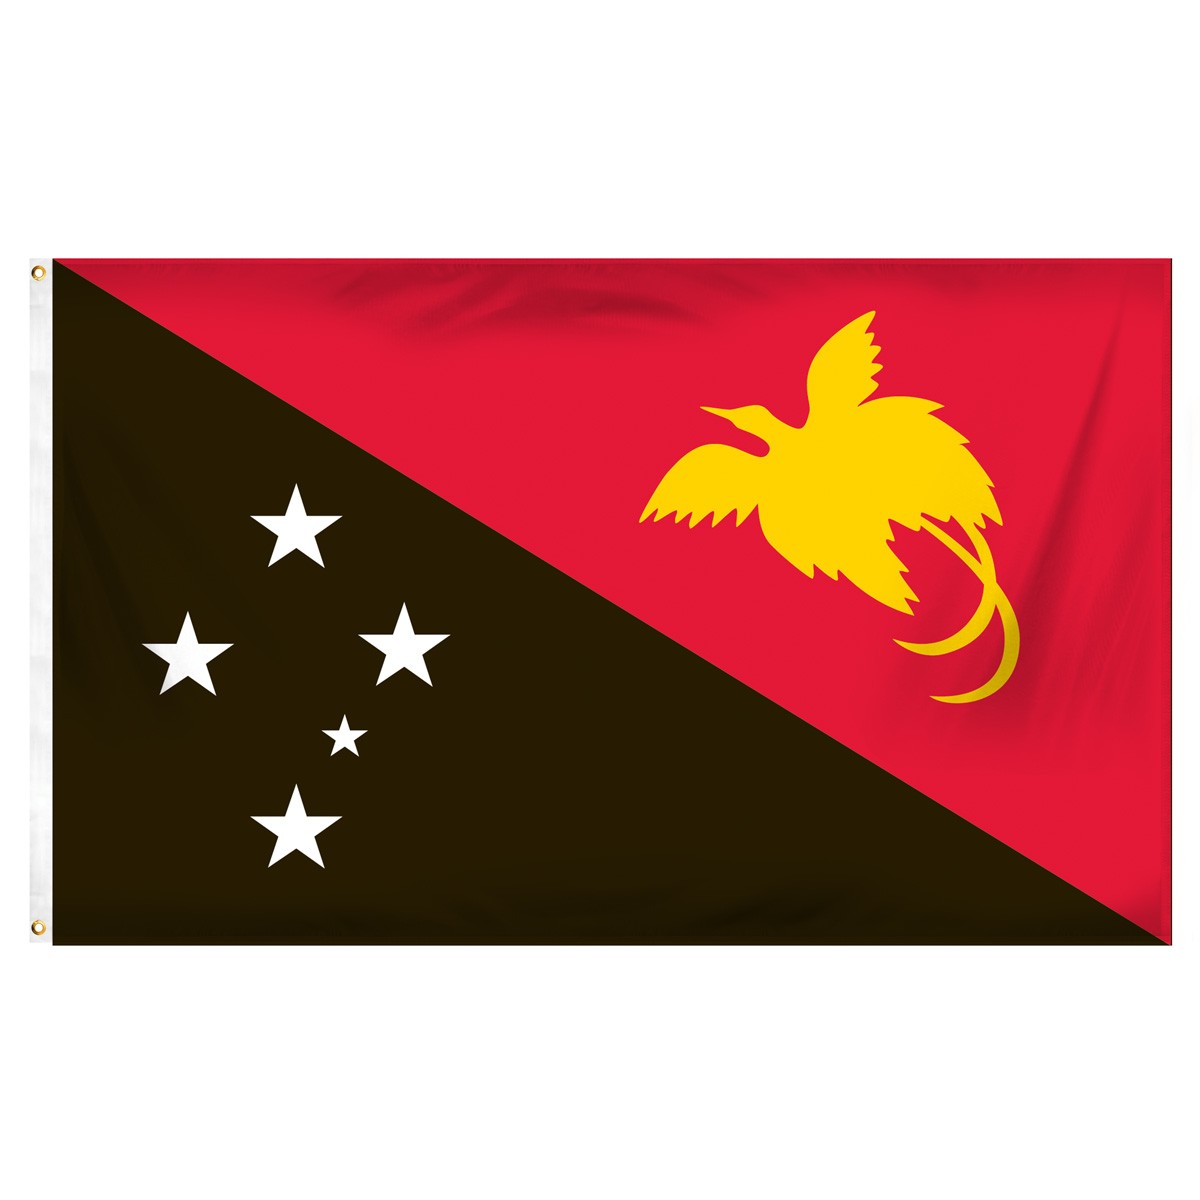 Papua New Guinea Posters and Banners